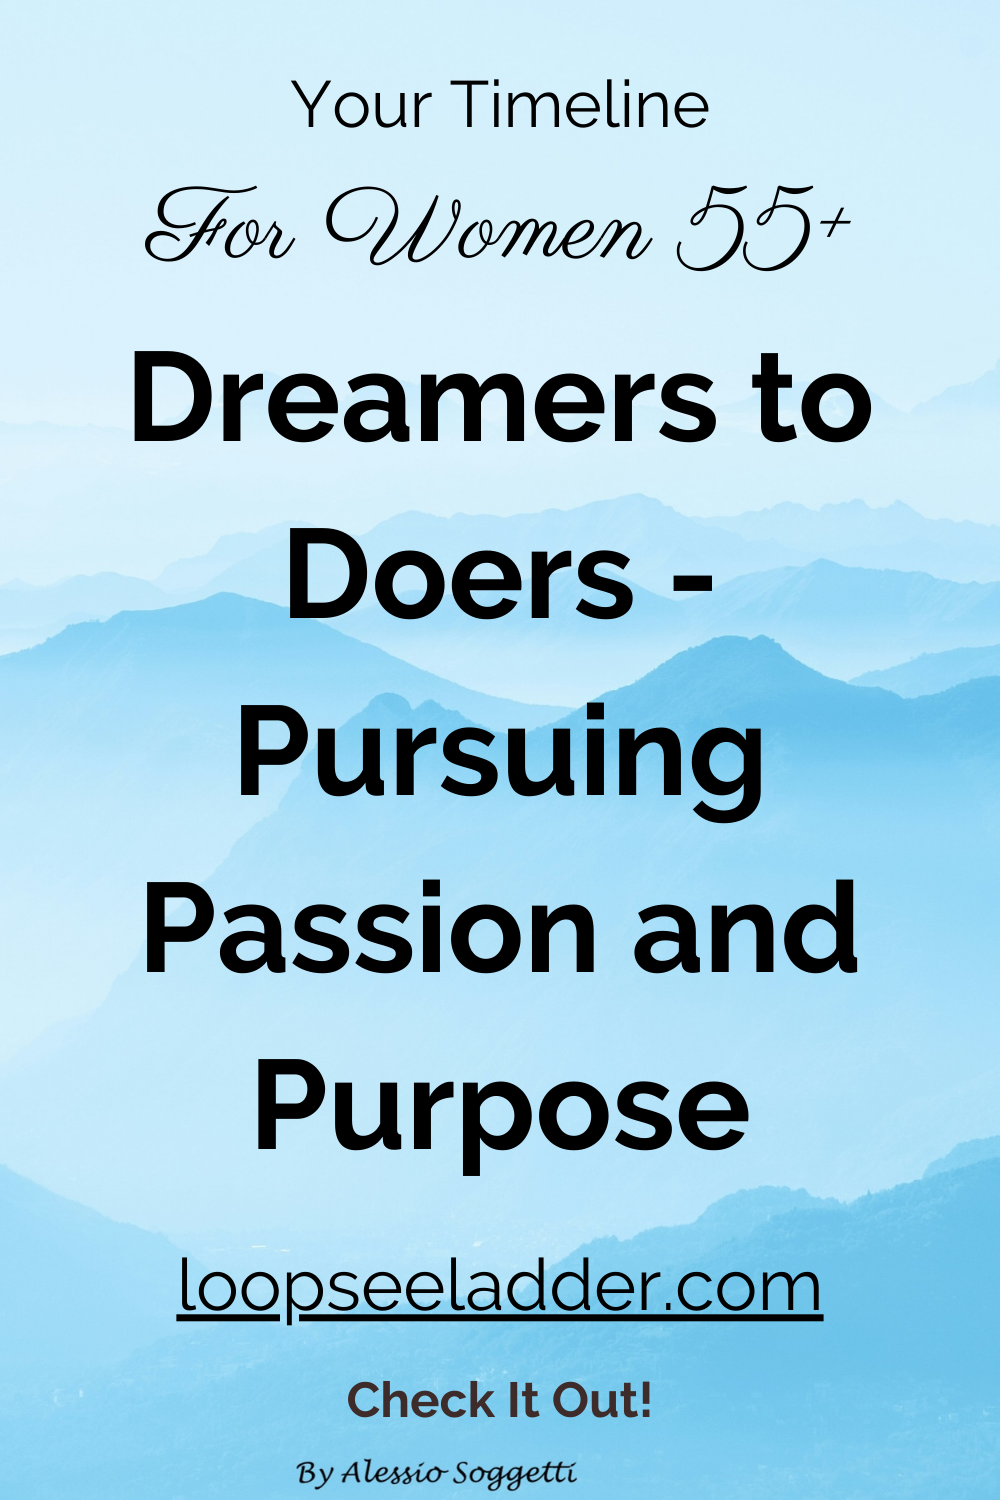 From Dreamers to Doers: Empowering Women 55+ to Pursue Their Passions and Live with Purpose.